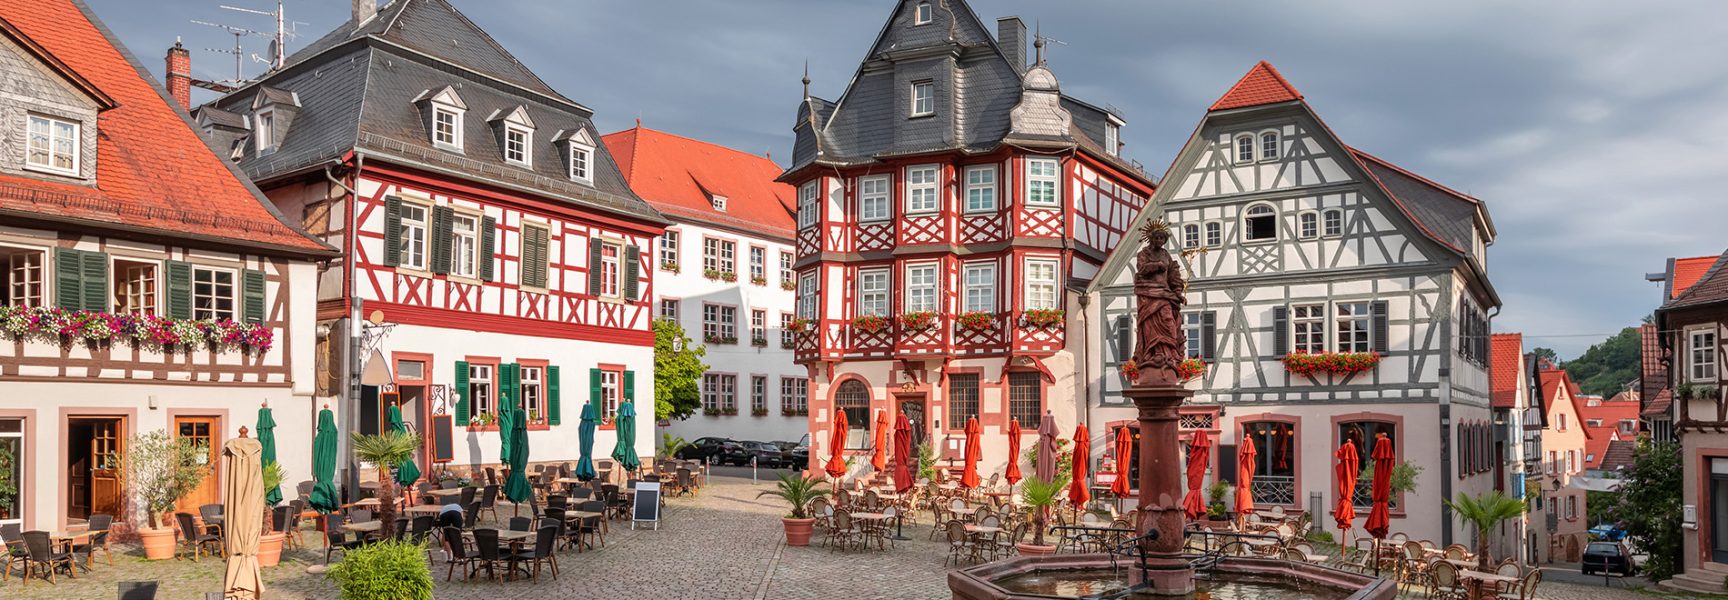 Timber houses on a market square in Heppenheim, Germany.